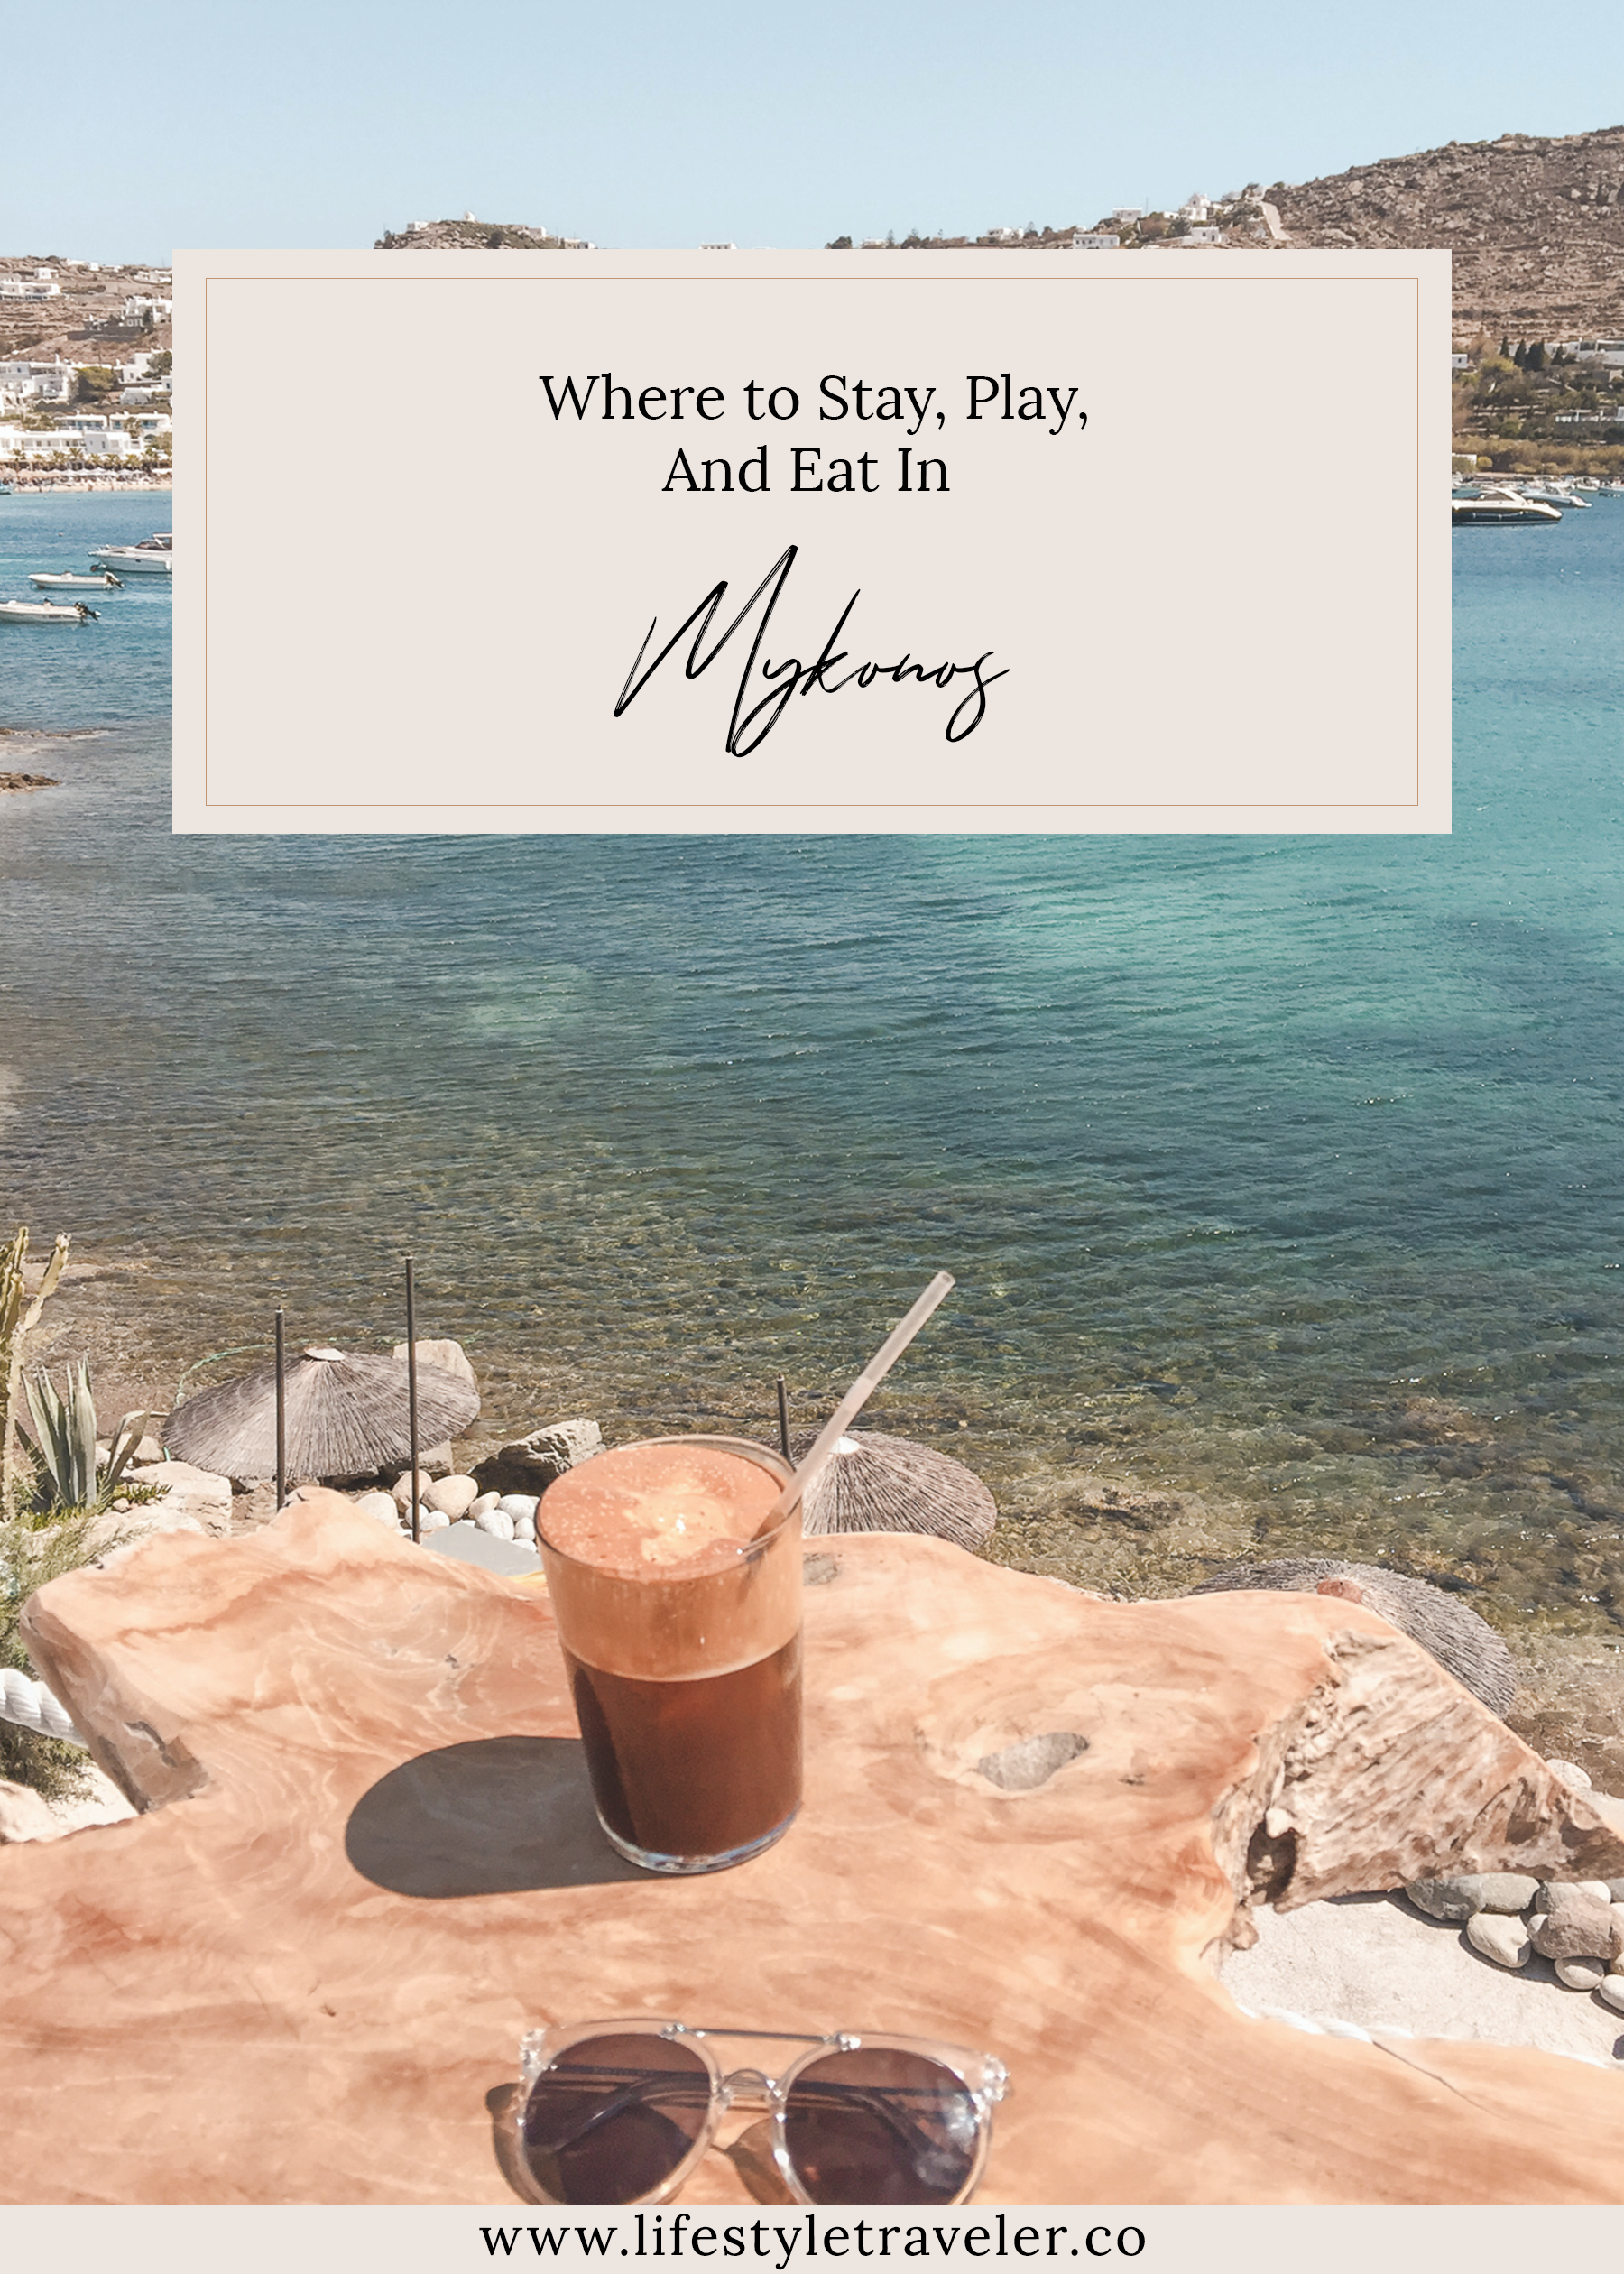 Summer in Mykonos - The Ultimate Leisure Guide | lifestyletraveler.co | IG: @lifestyletraveler.co